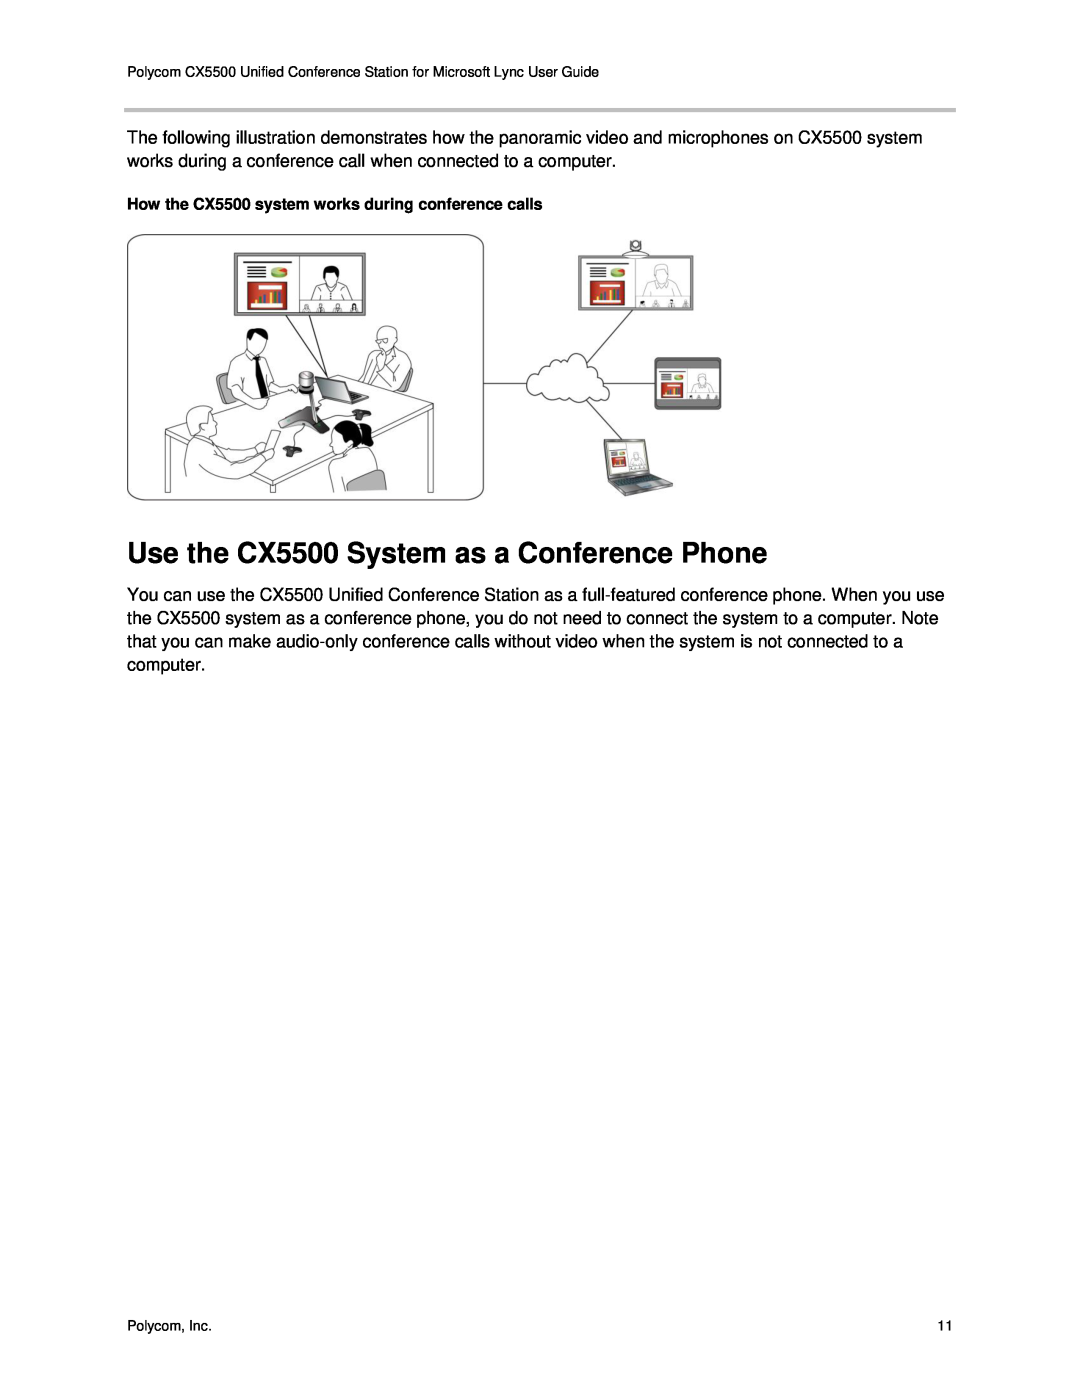 Polycom manual Use the CX5500 System as a Conference Phone, How the CX5500 system works during conference calls 